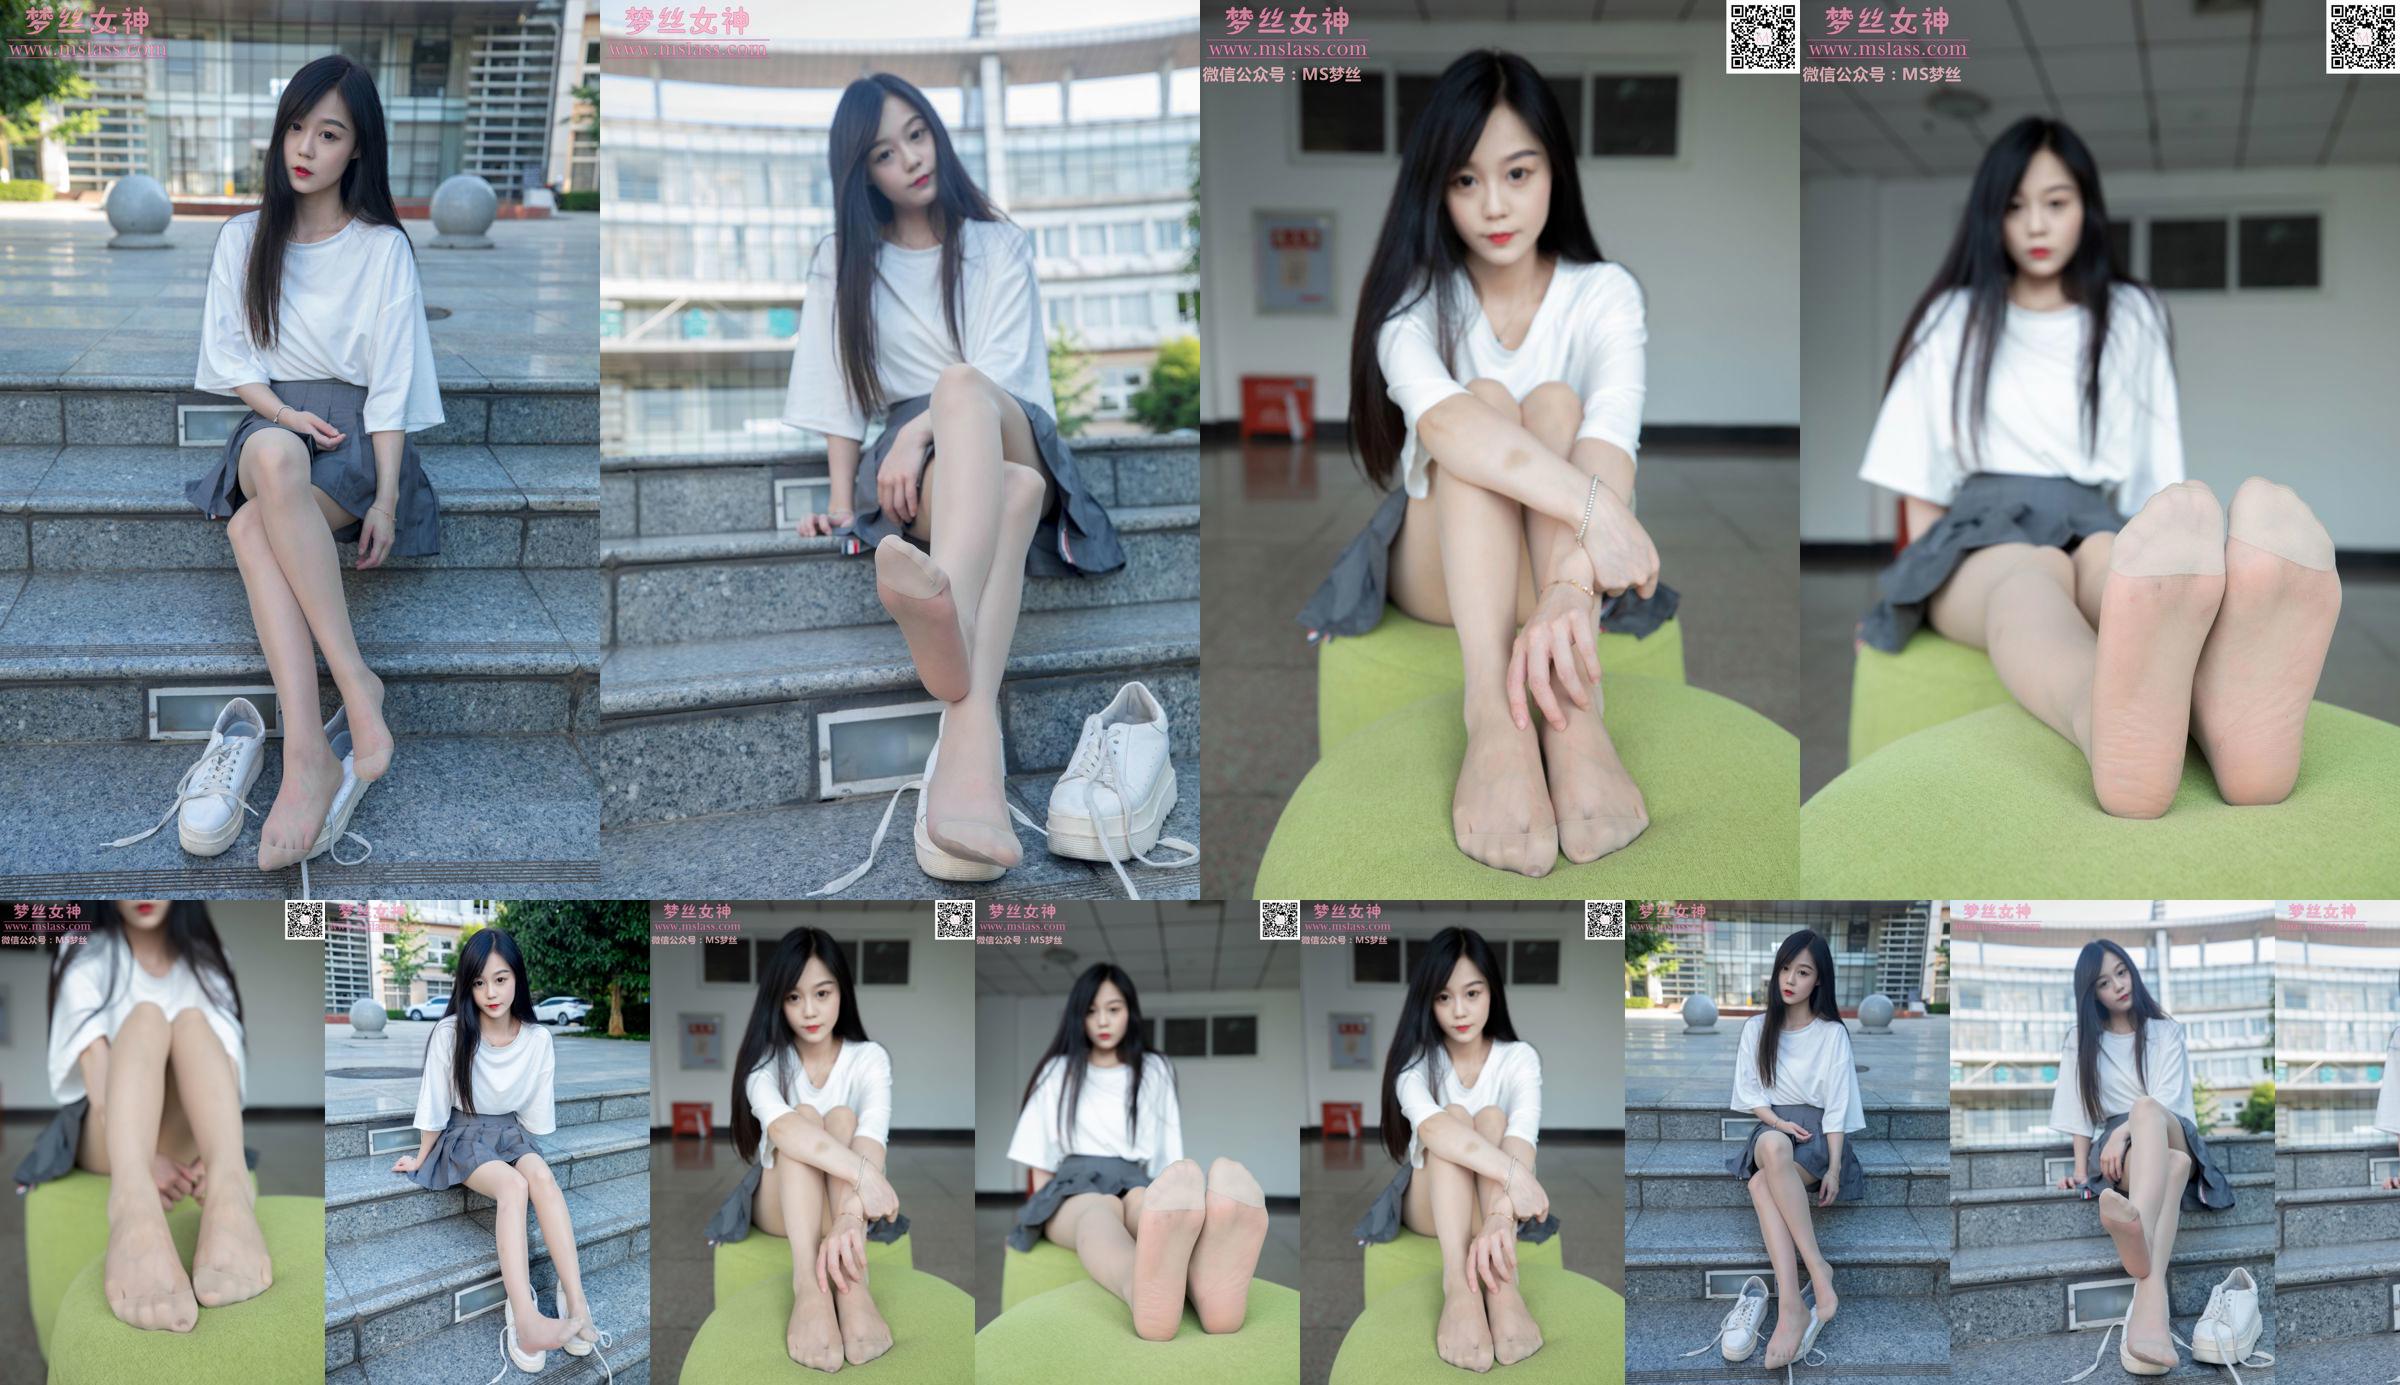 [Mengsi Goddess MSLASS] Lingling, sweet and quiet star face No.4b2e97 Page 3